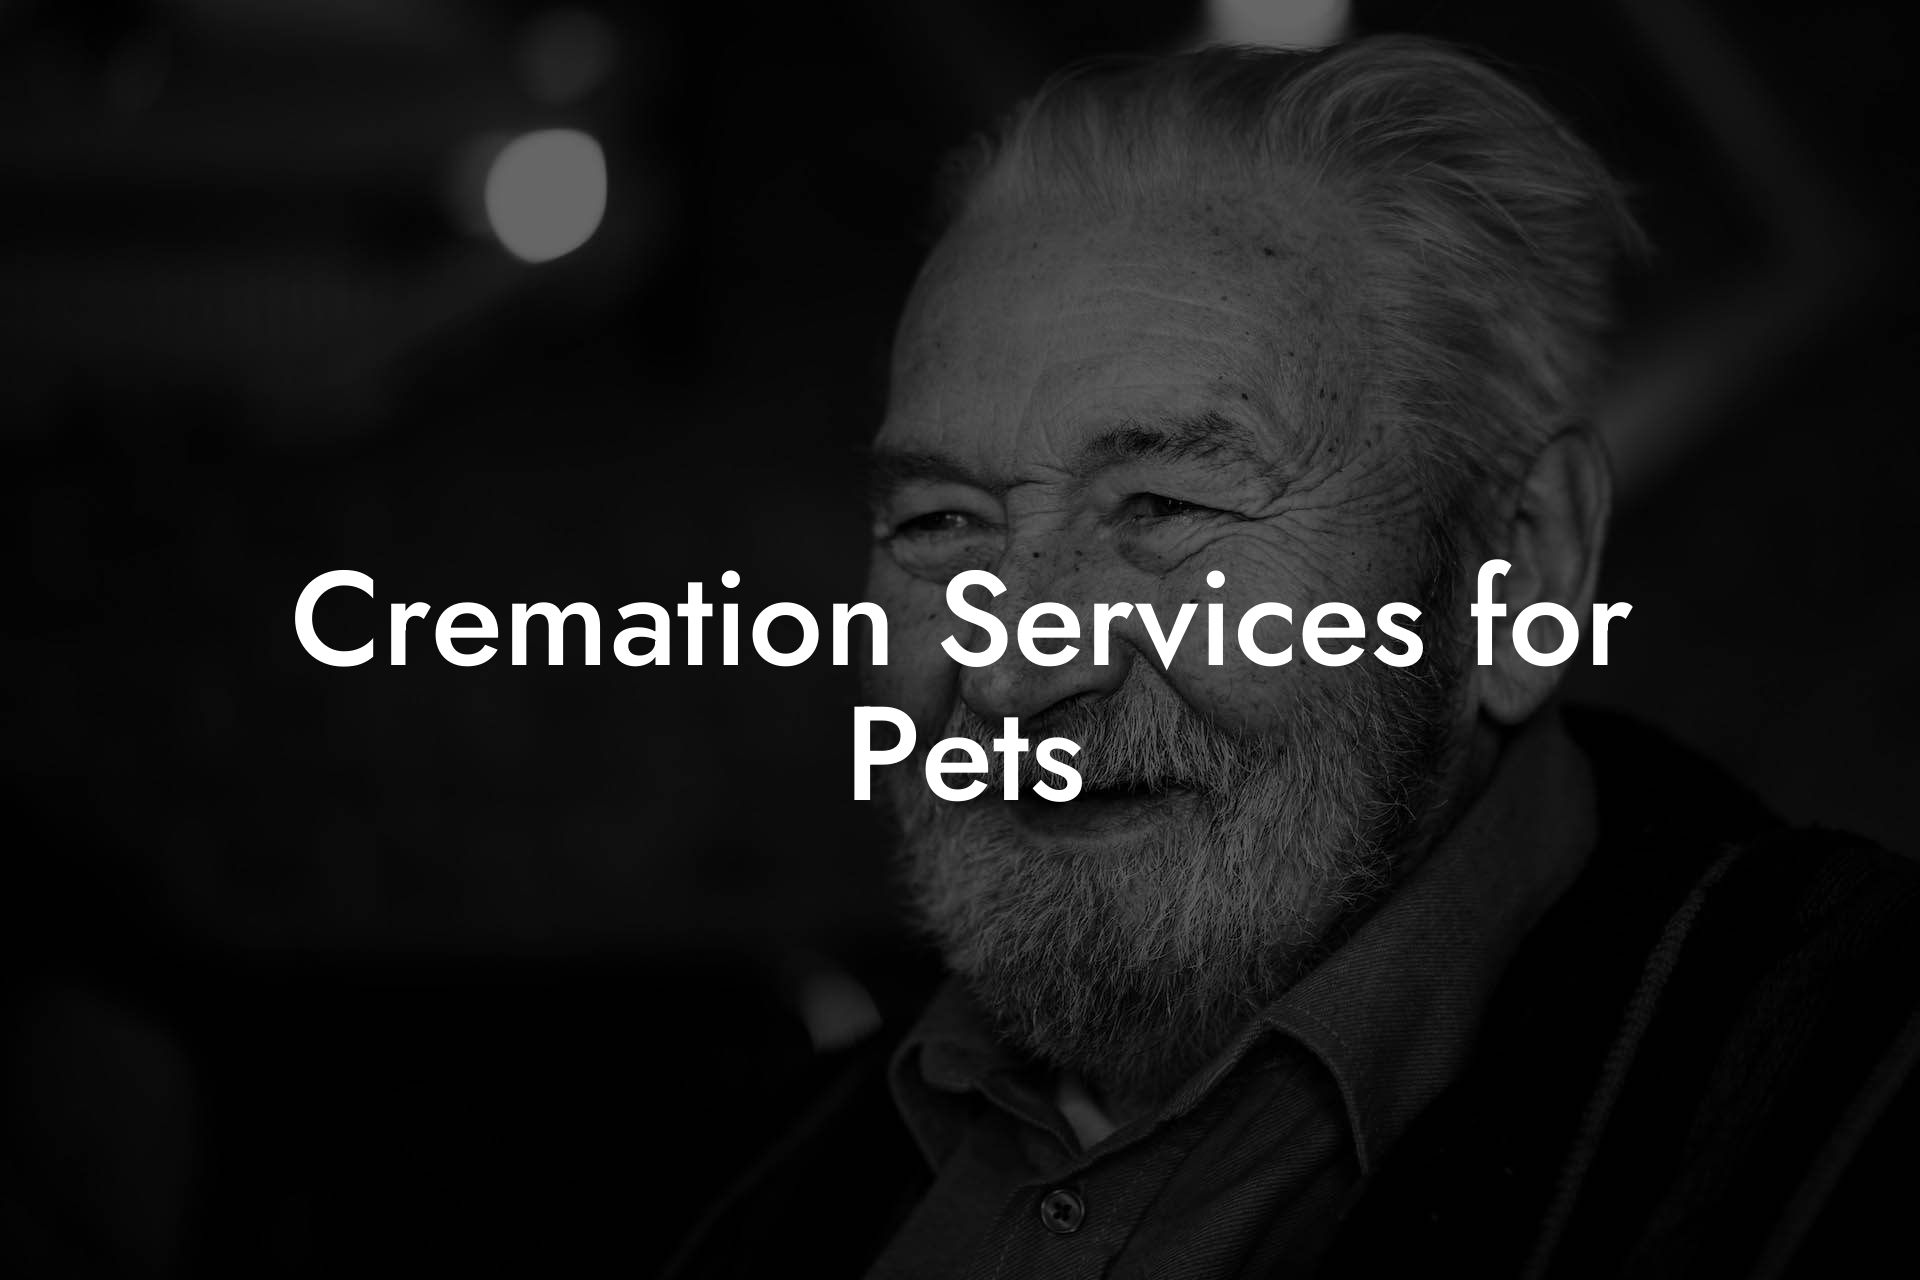 Cremation Services for Pets